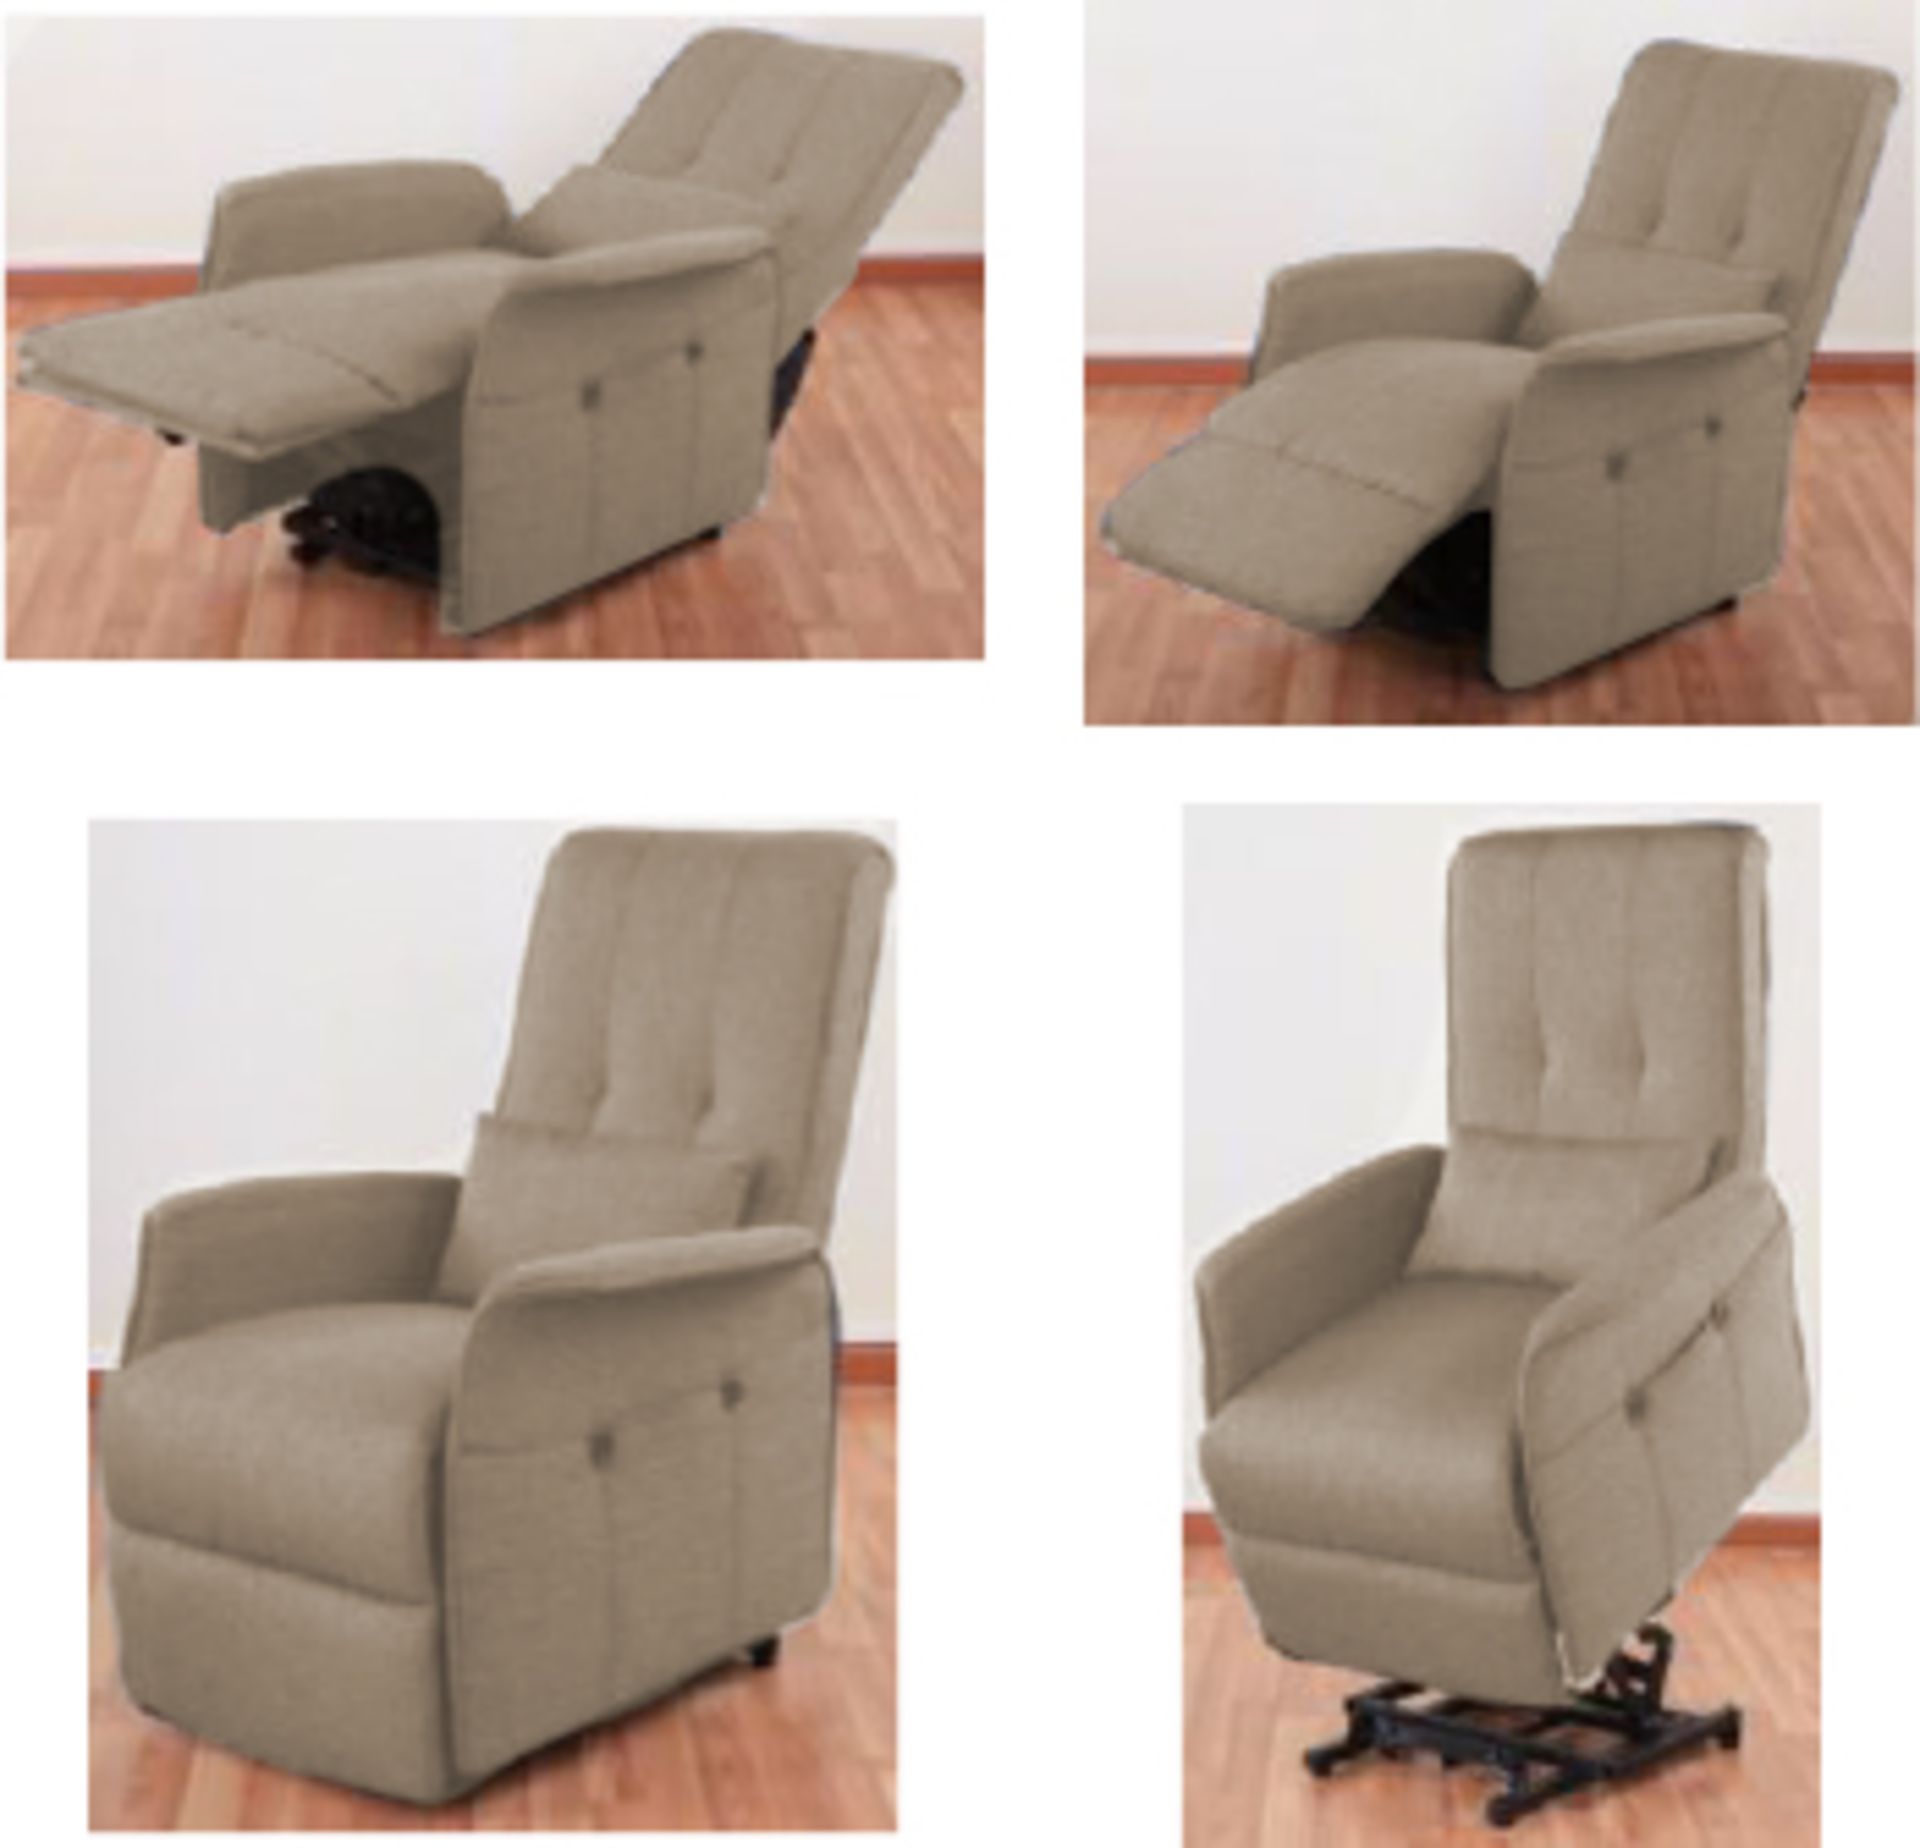 V Brown Rise & Recline Electric Chair With Remote Control - Brand New In Box